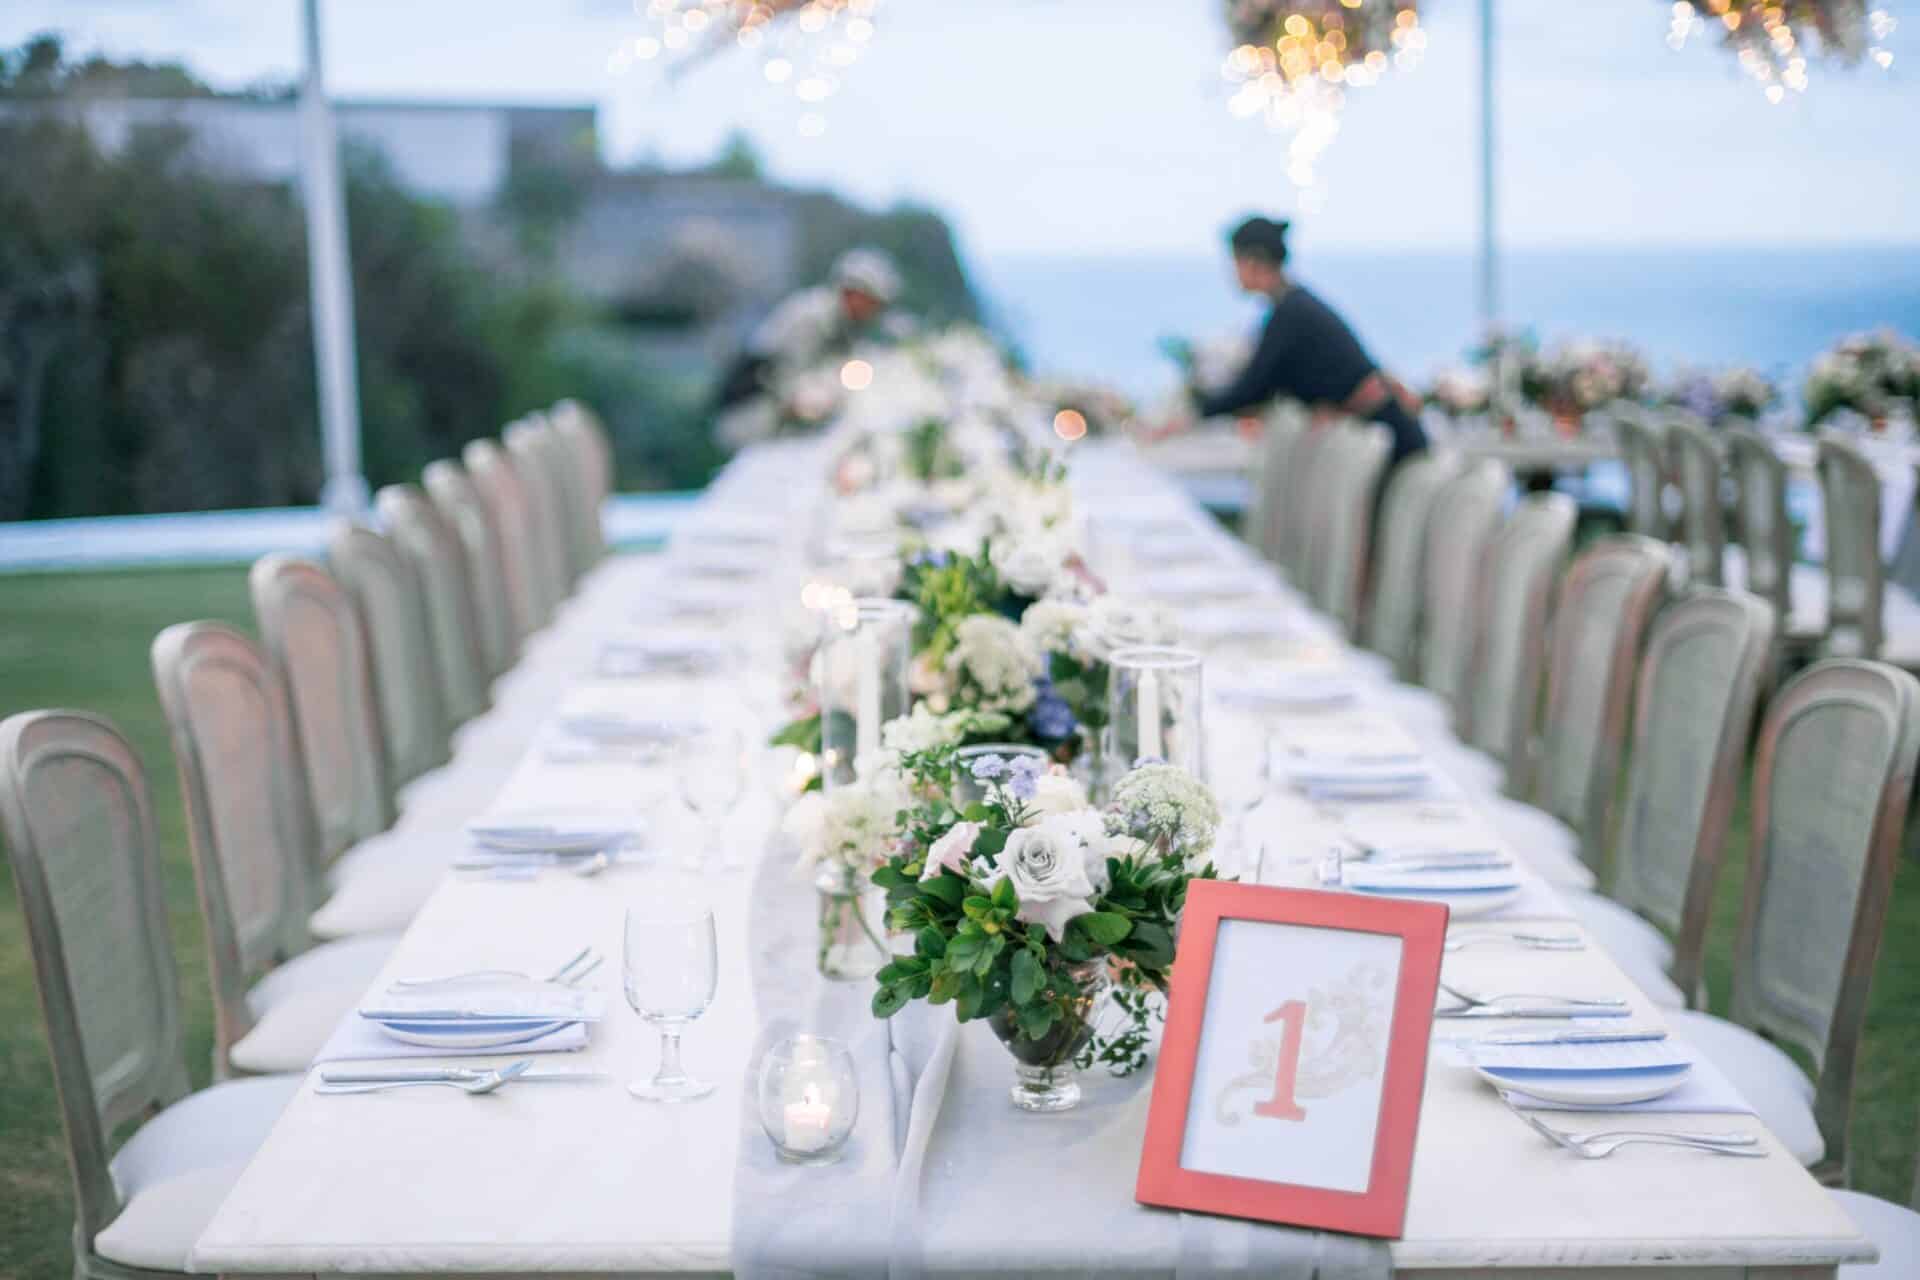 A beautiful outdoor table setting with floral decorations and candles for a wedding reception during daytime